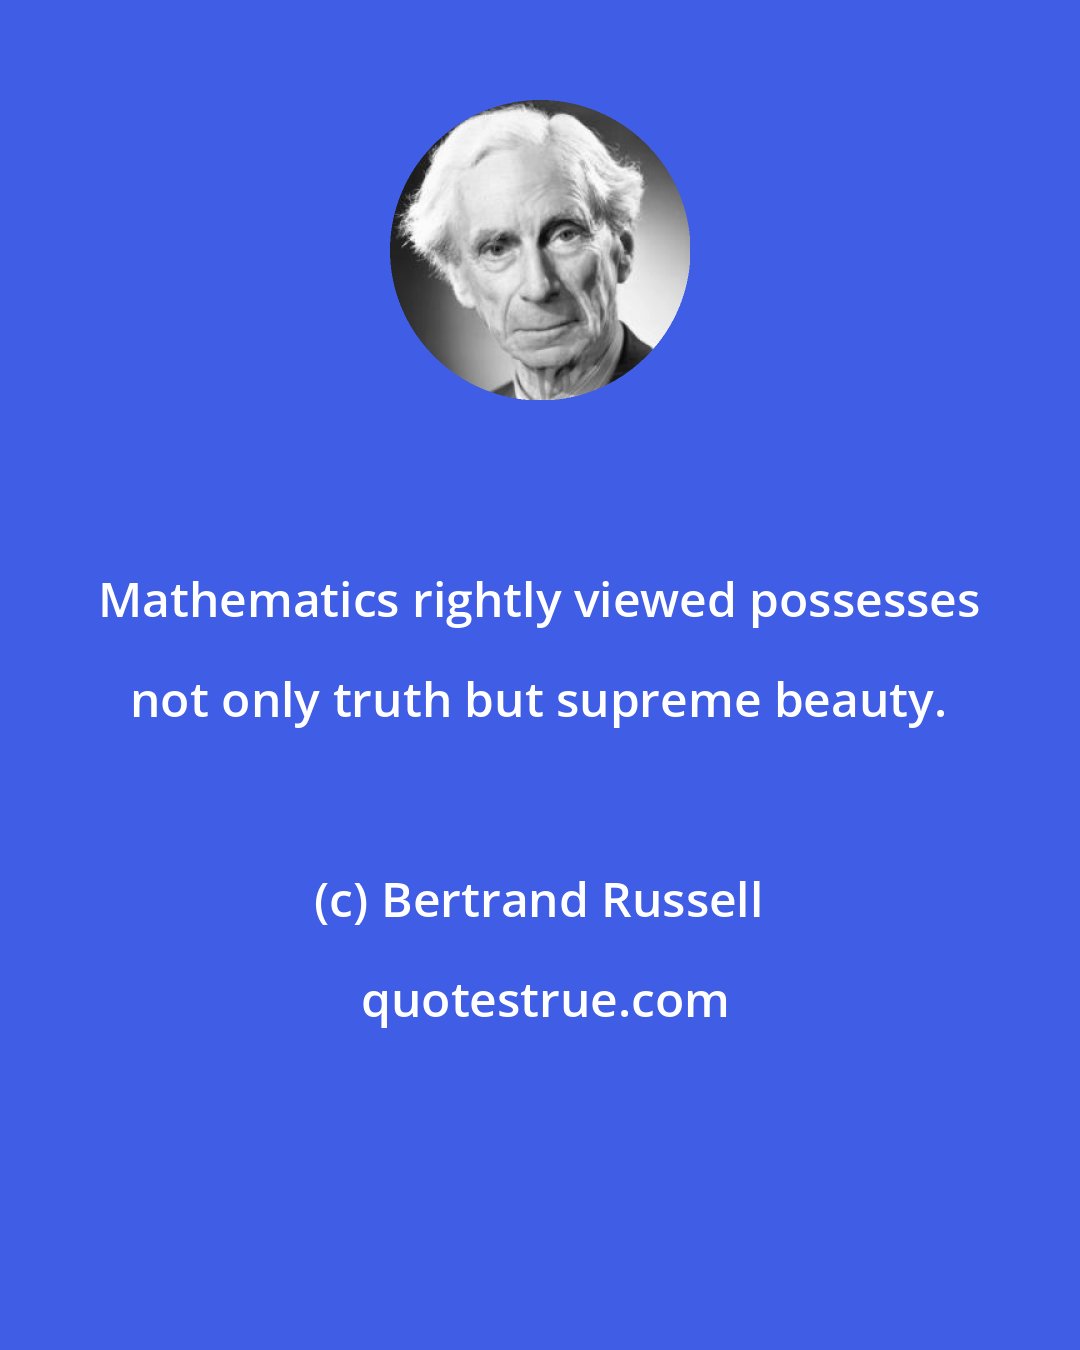 Bertrand Russell: Mathematics rightly viewed possesses not only truth but supreme beauty.